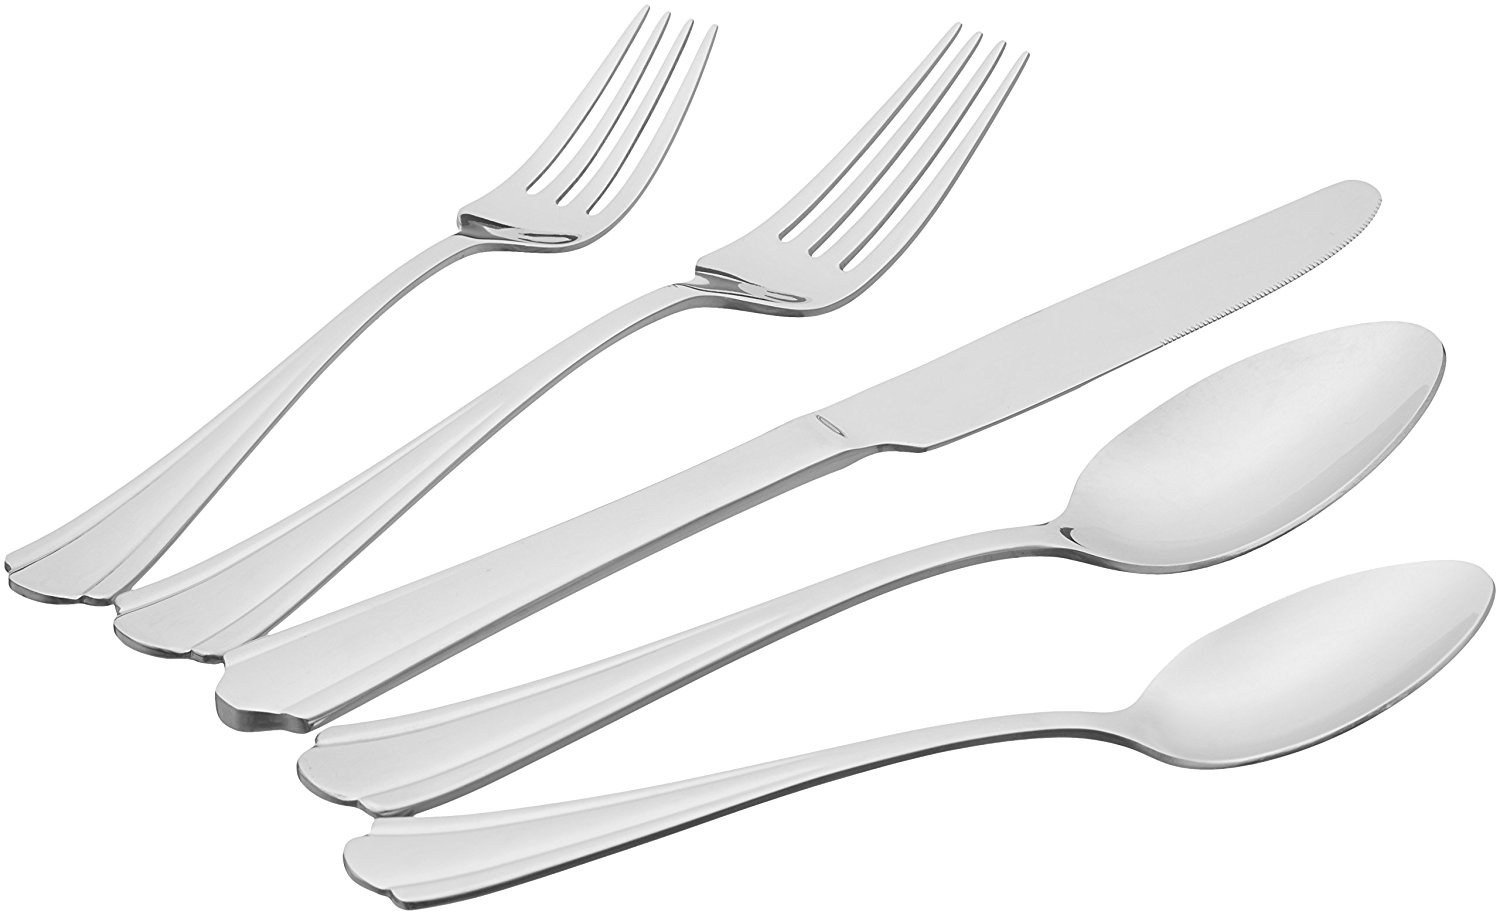 AmazonBasics 20 Piece Stainless Steel Flatware Set Only $9.15!